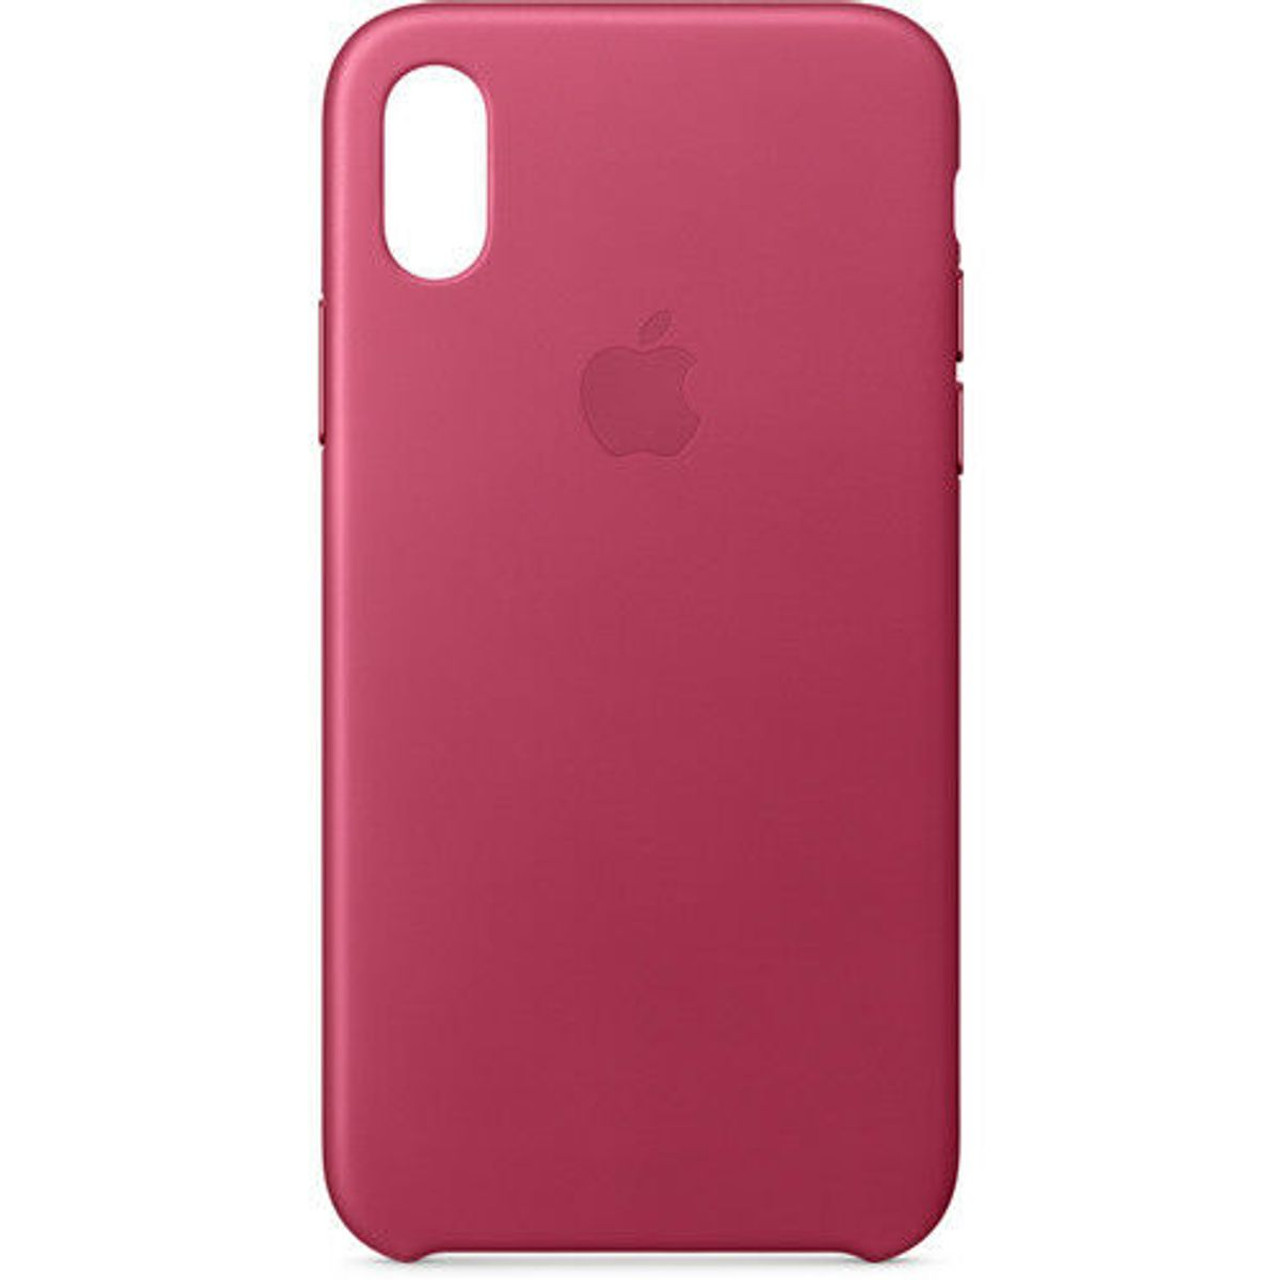 Apple iPhone X Leather Case  product image